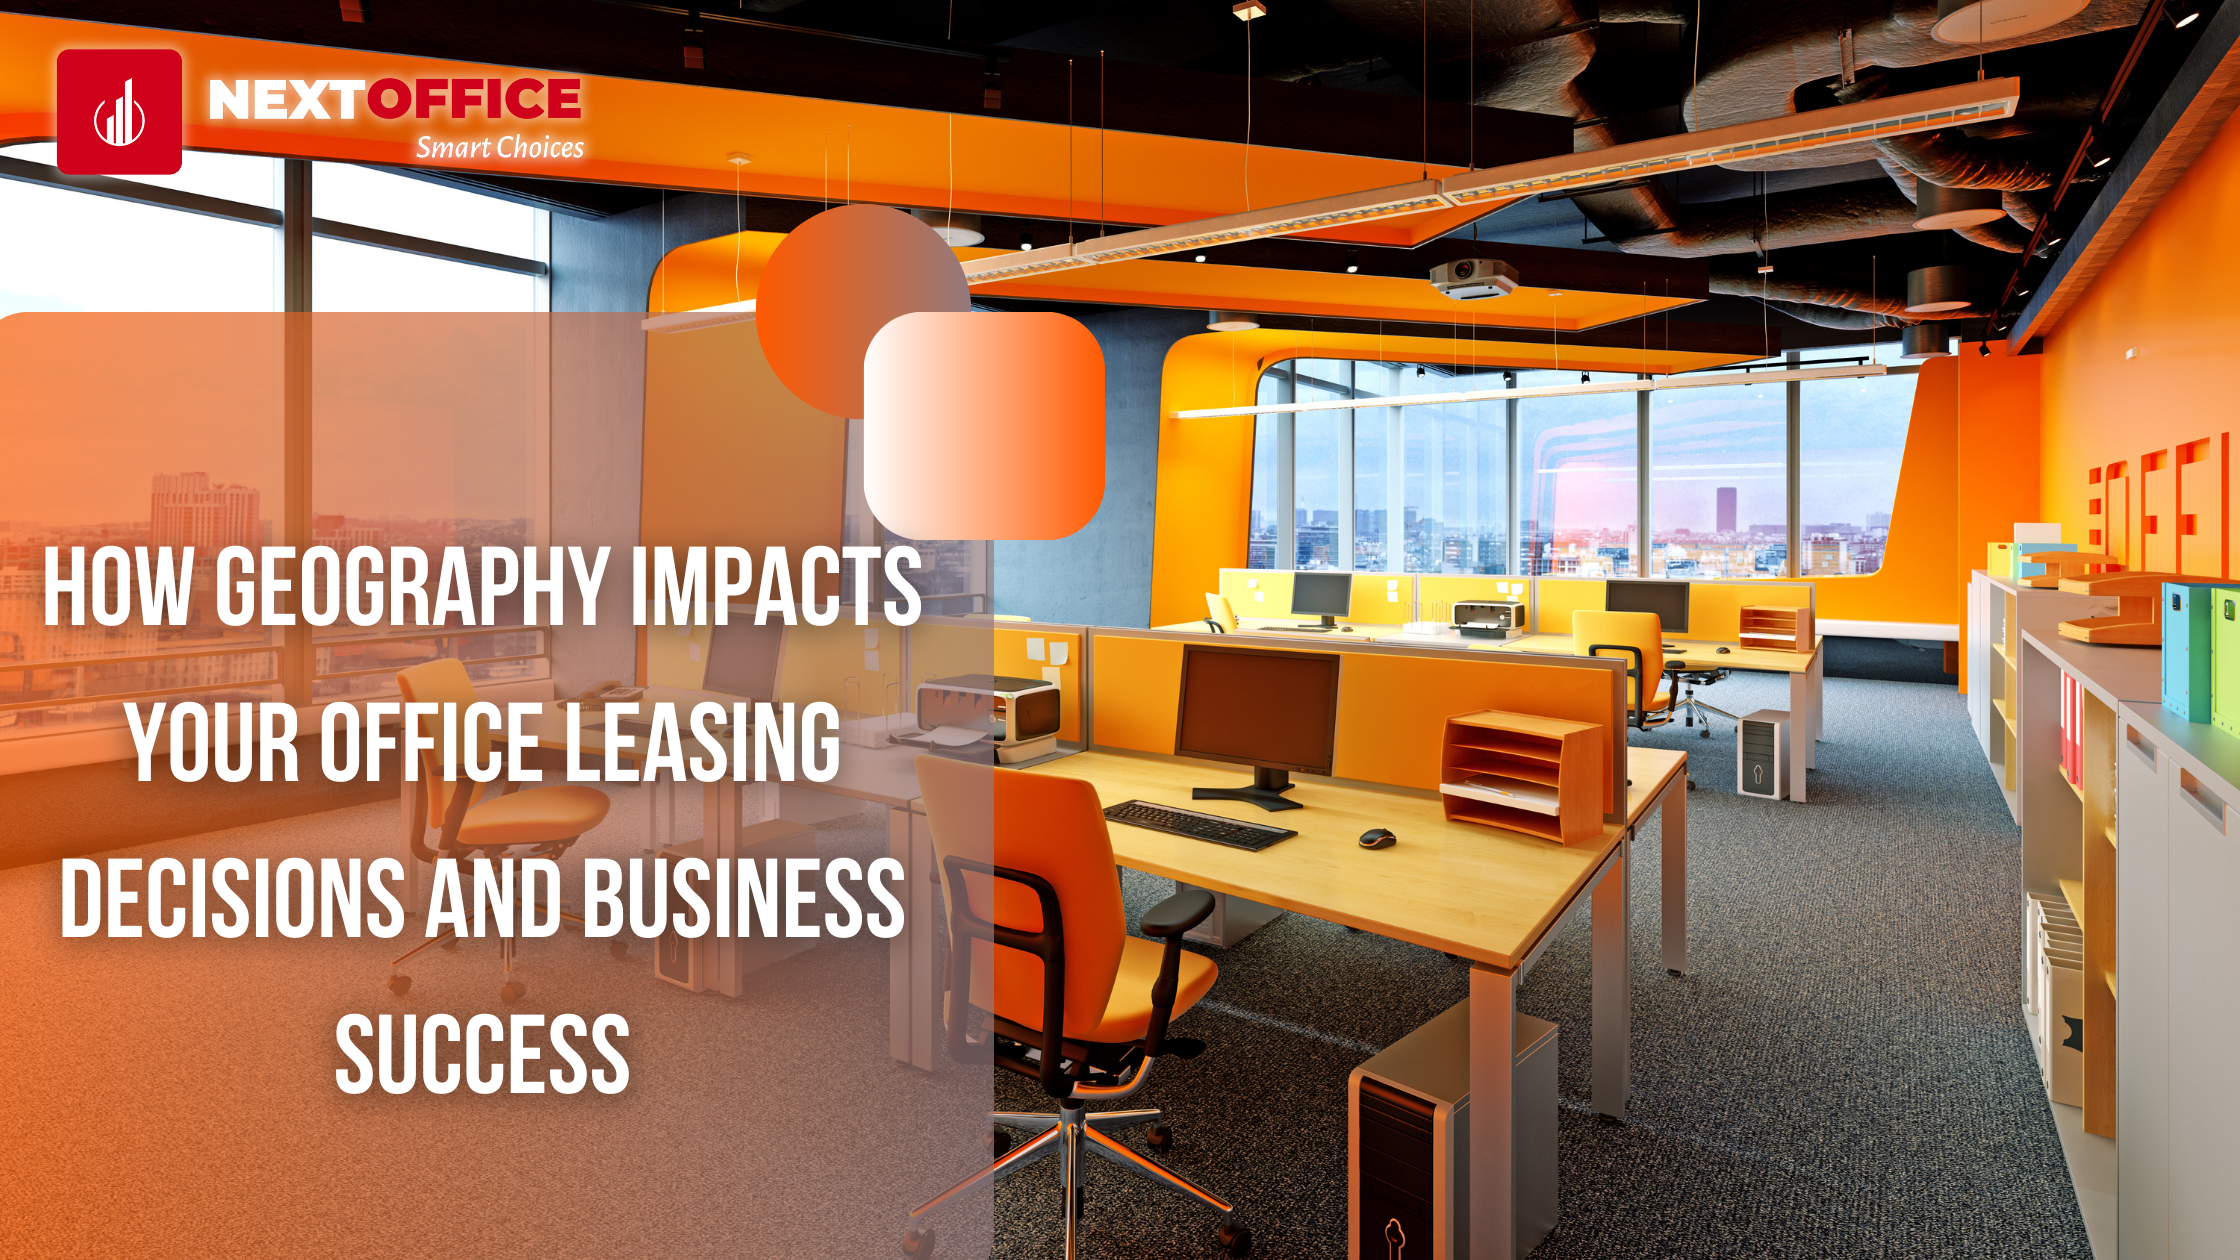 How Geography Impacts Your Office Leasing Decisions and Business Success